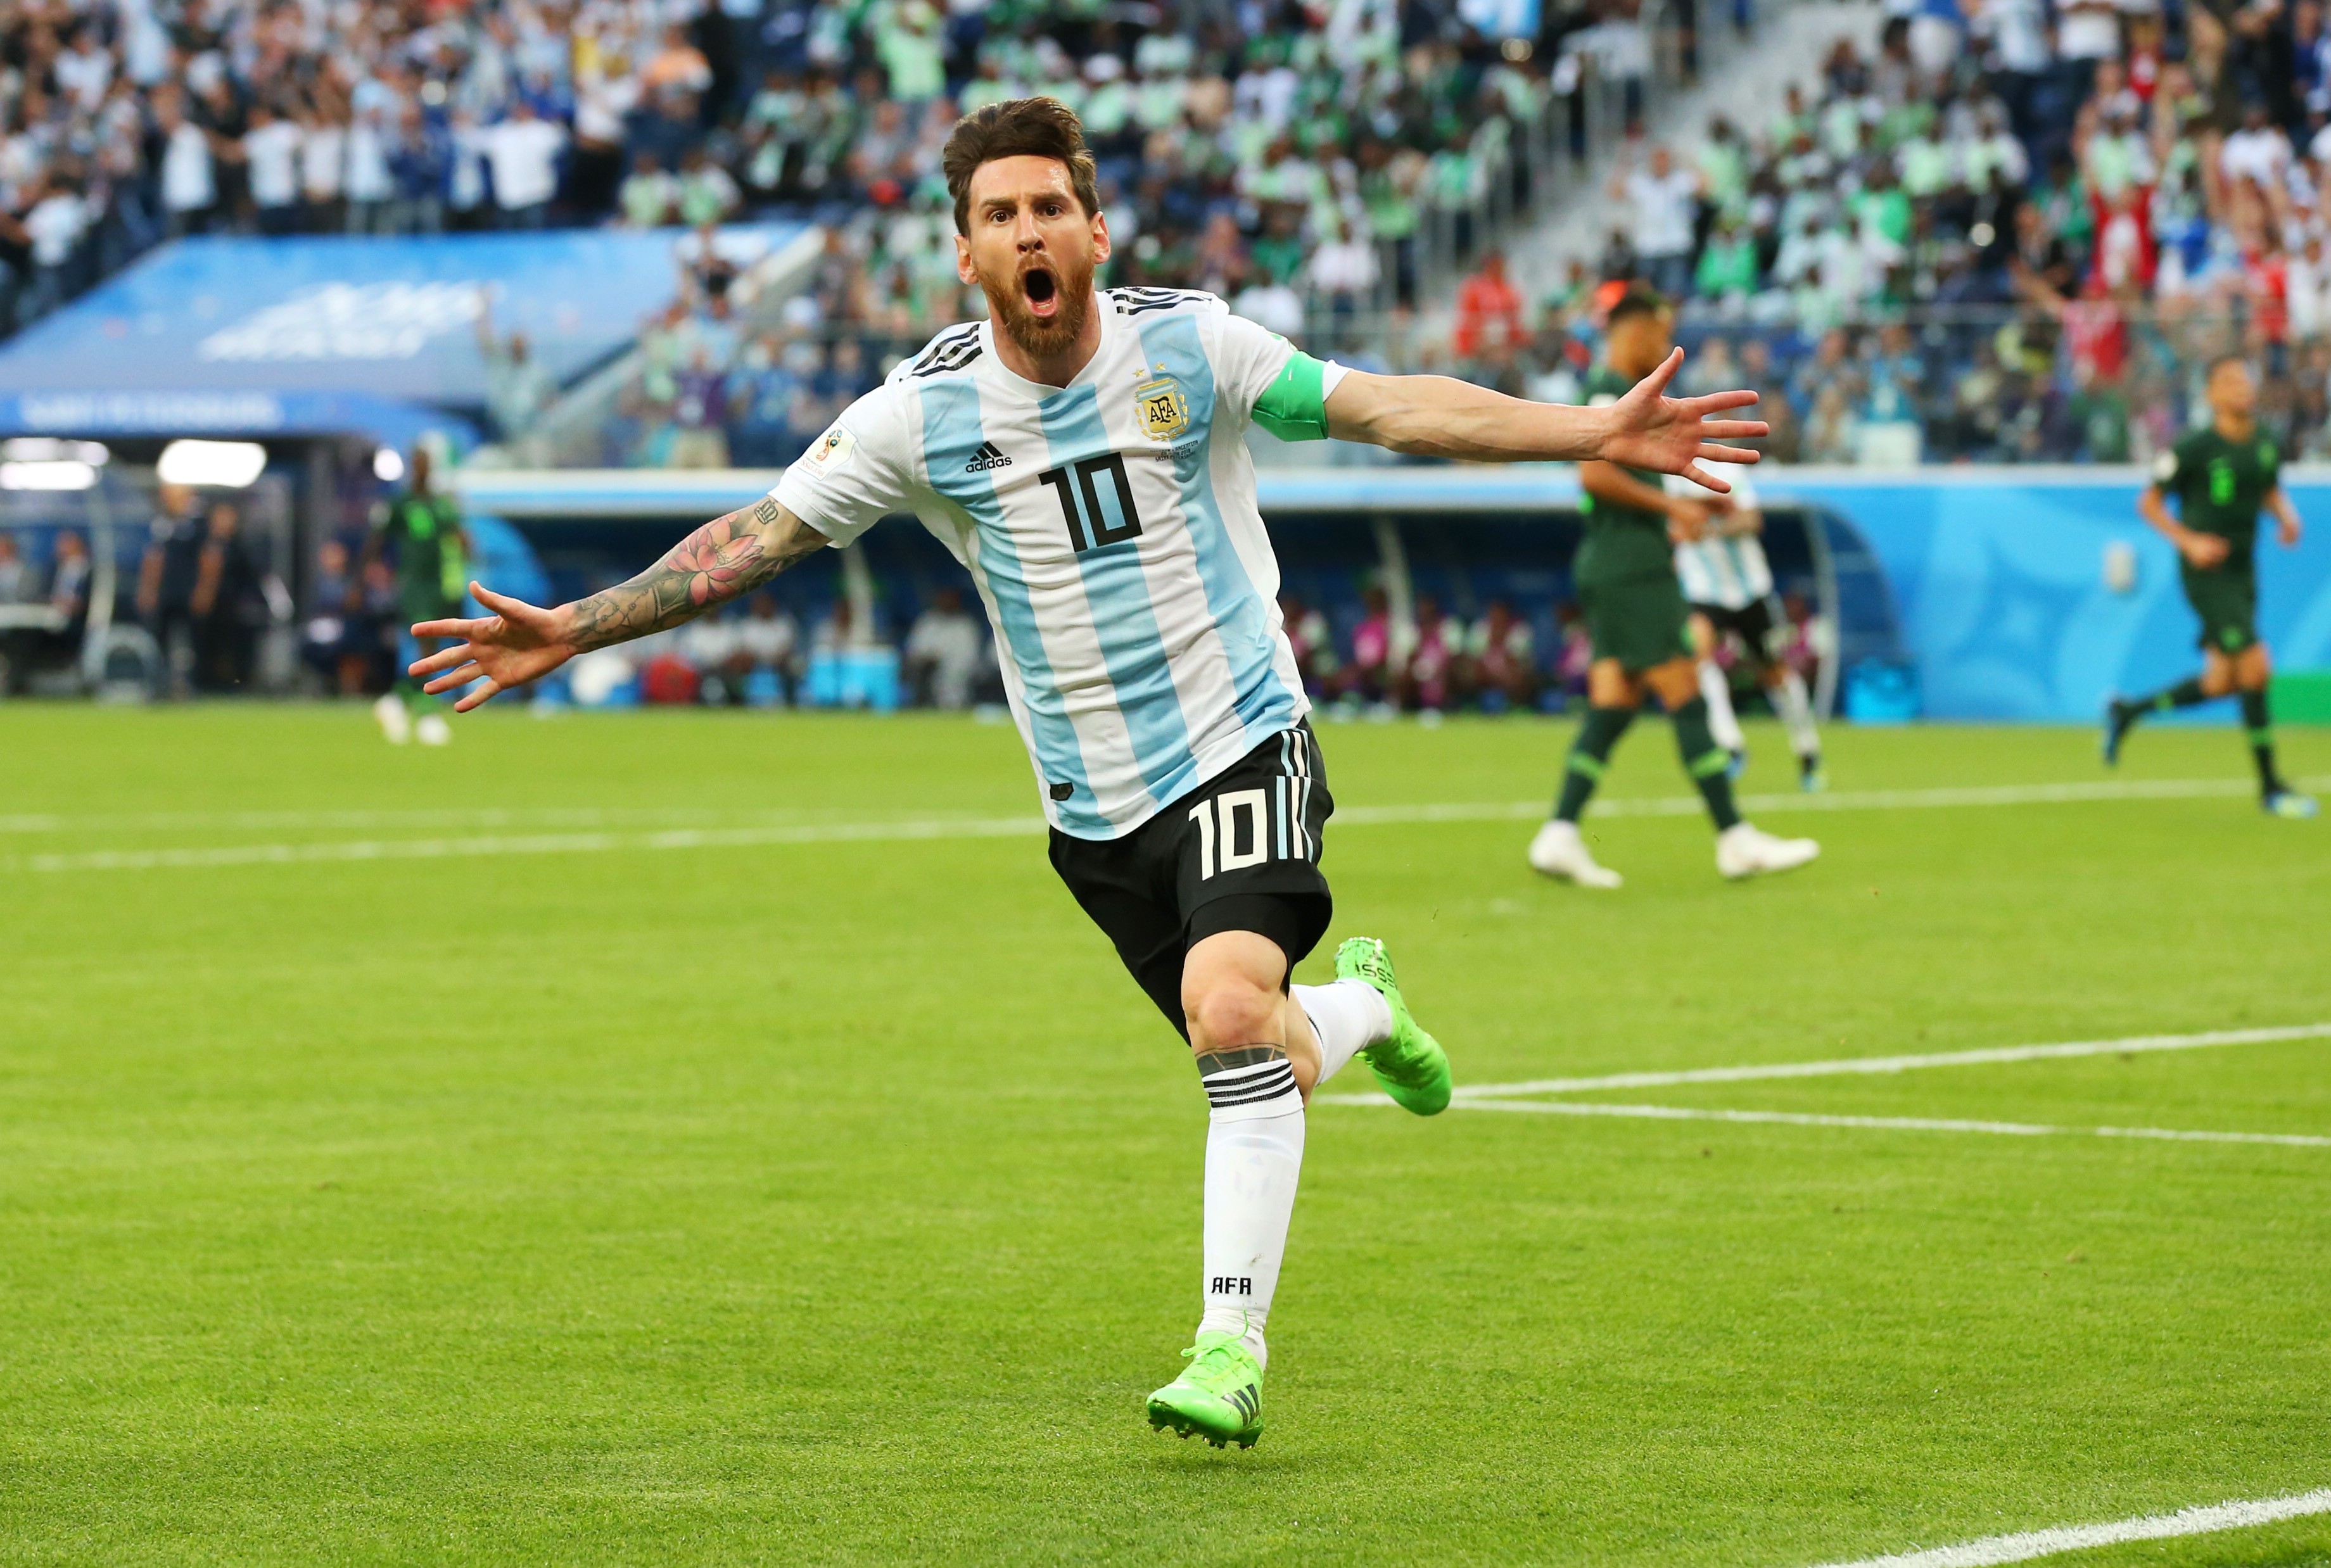 Lionel Messi completed football! How Argentina's World Cup hero